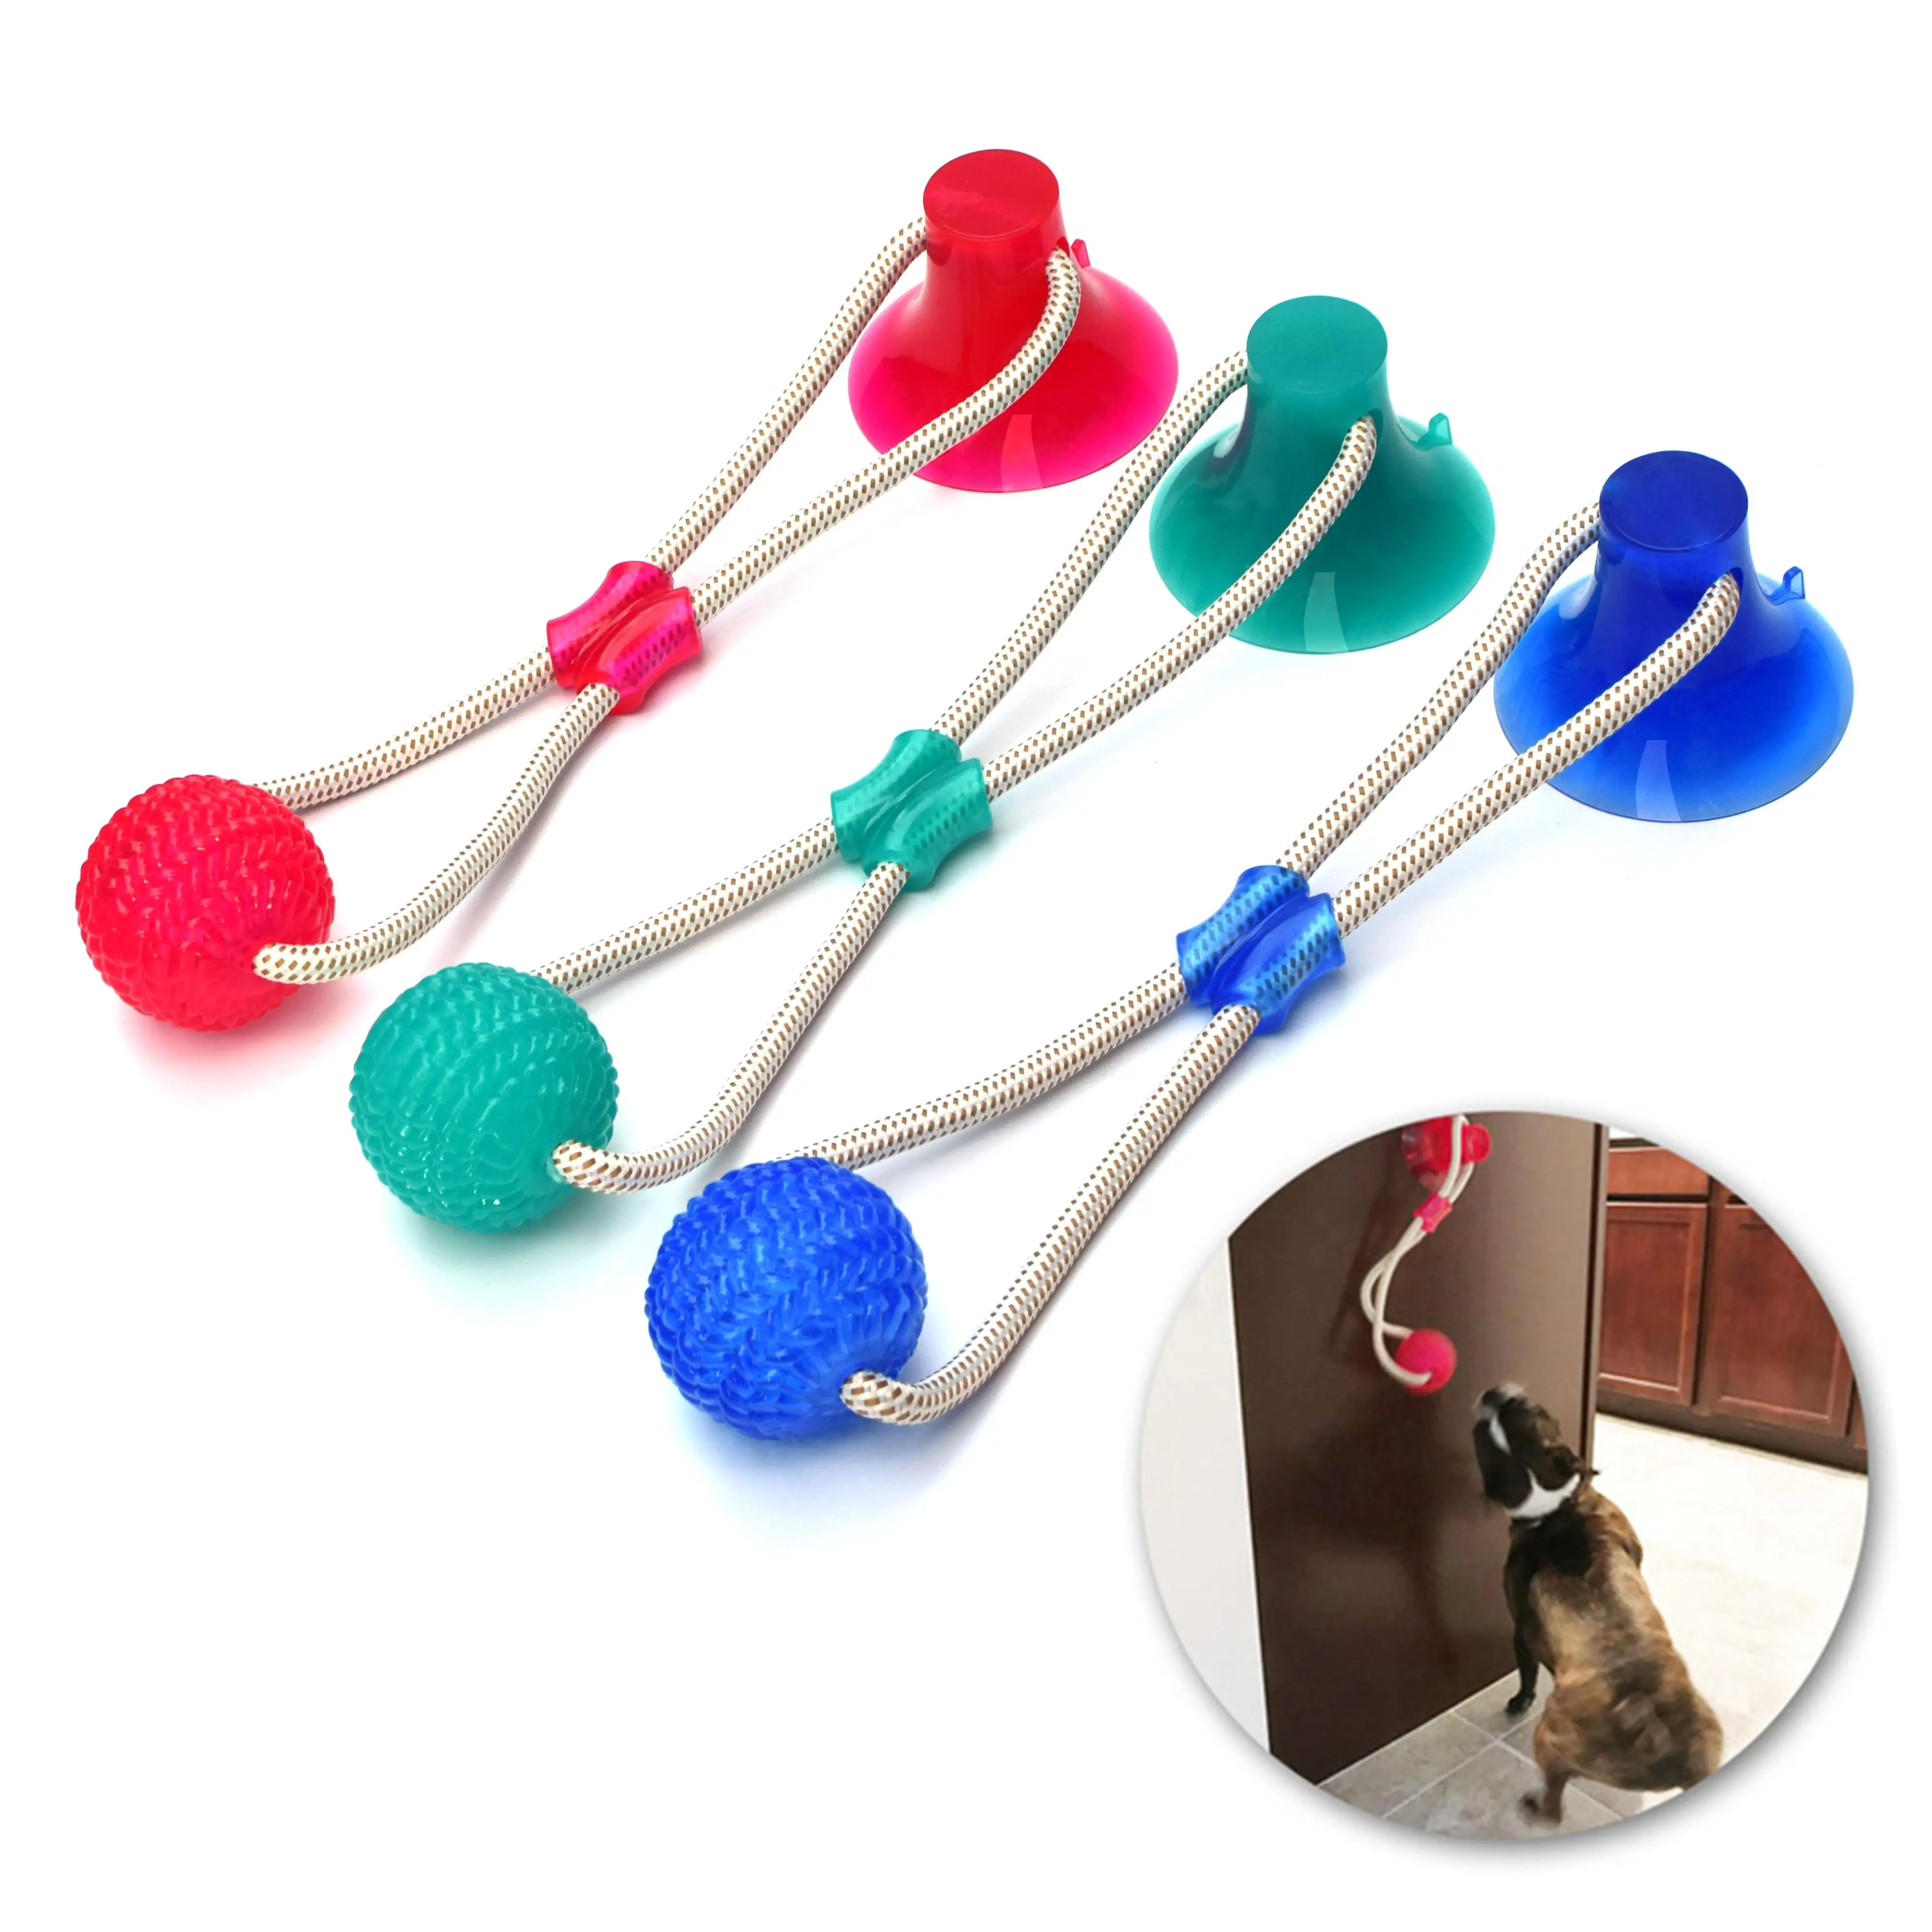 

Multifunction Pet Molar Bite Dog Toys Rubber Chew Ball Cleaning Teeth Safe Elasticity TPR Soft Puppy Suction Cup Biting Dog Toy, As photo